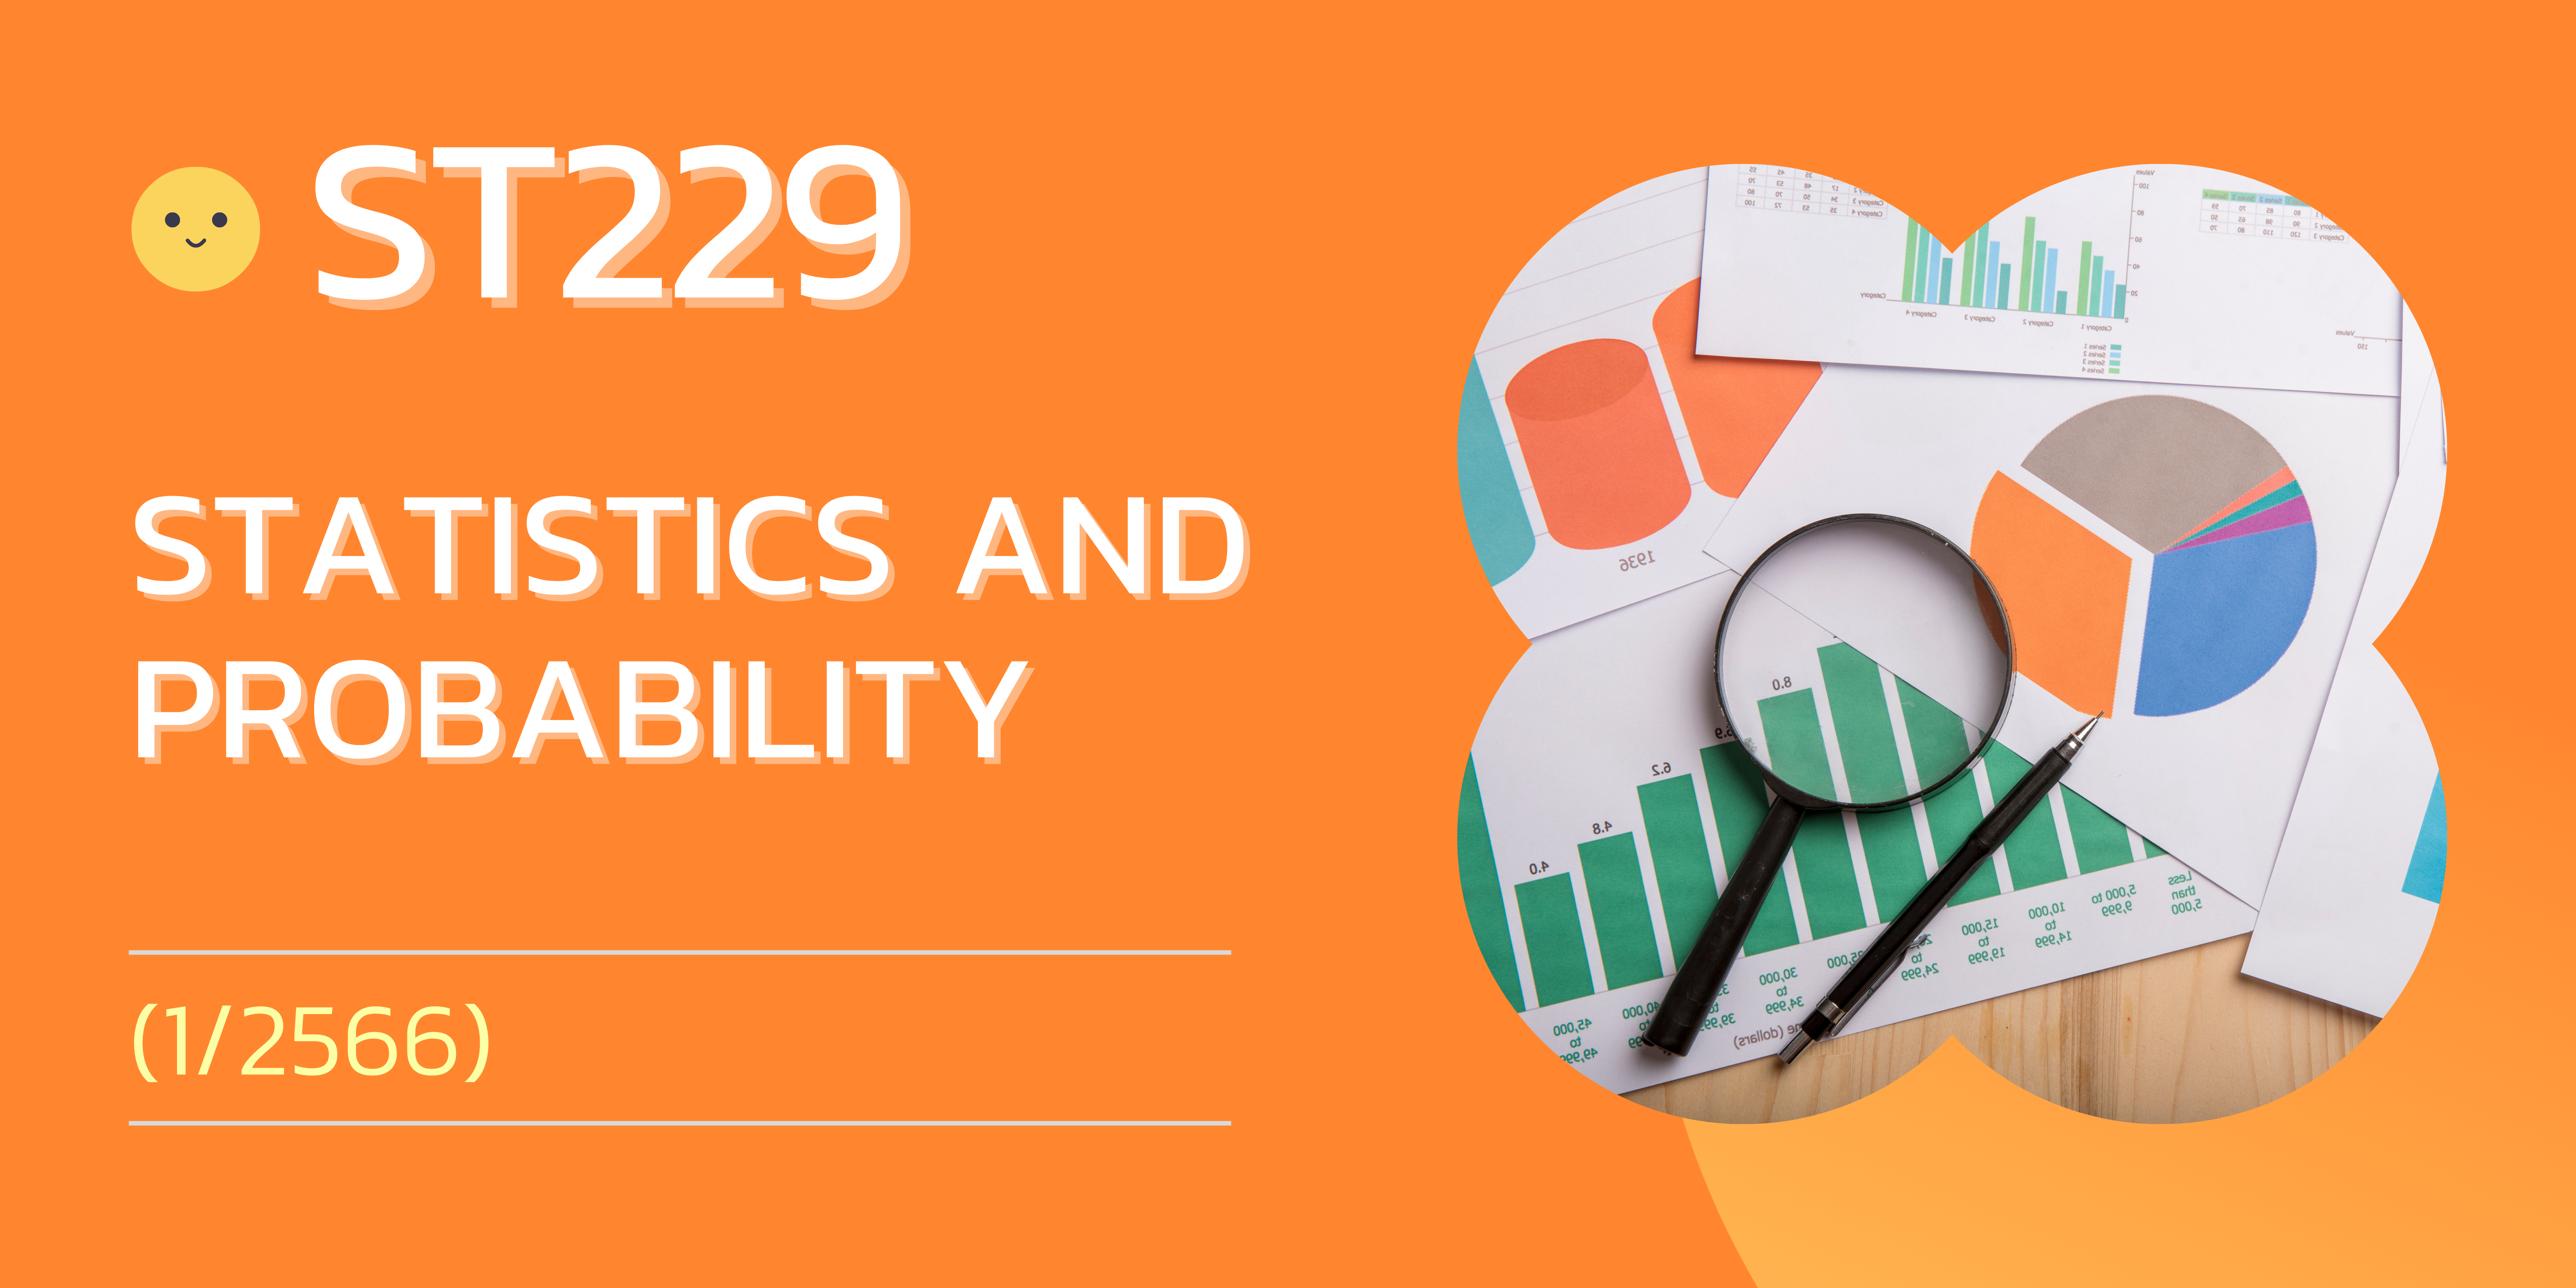 ST229 Statistics and Probability (1/2566)